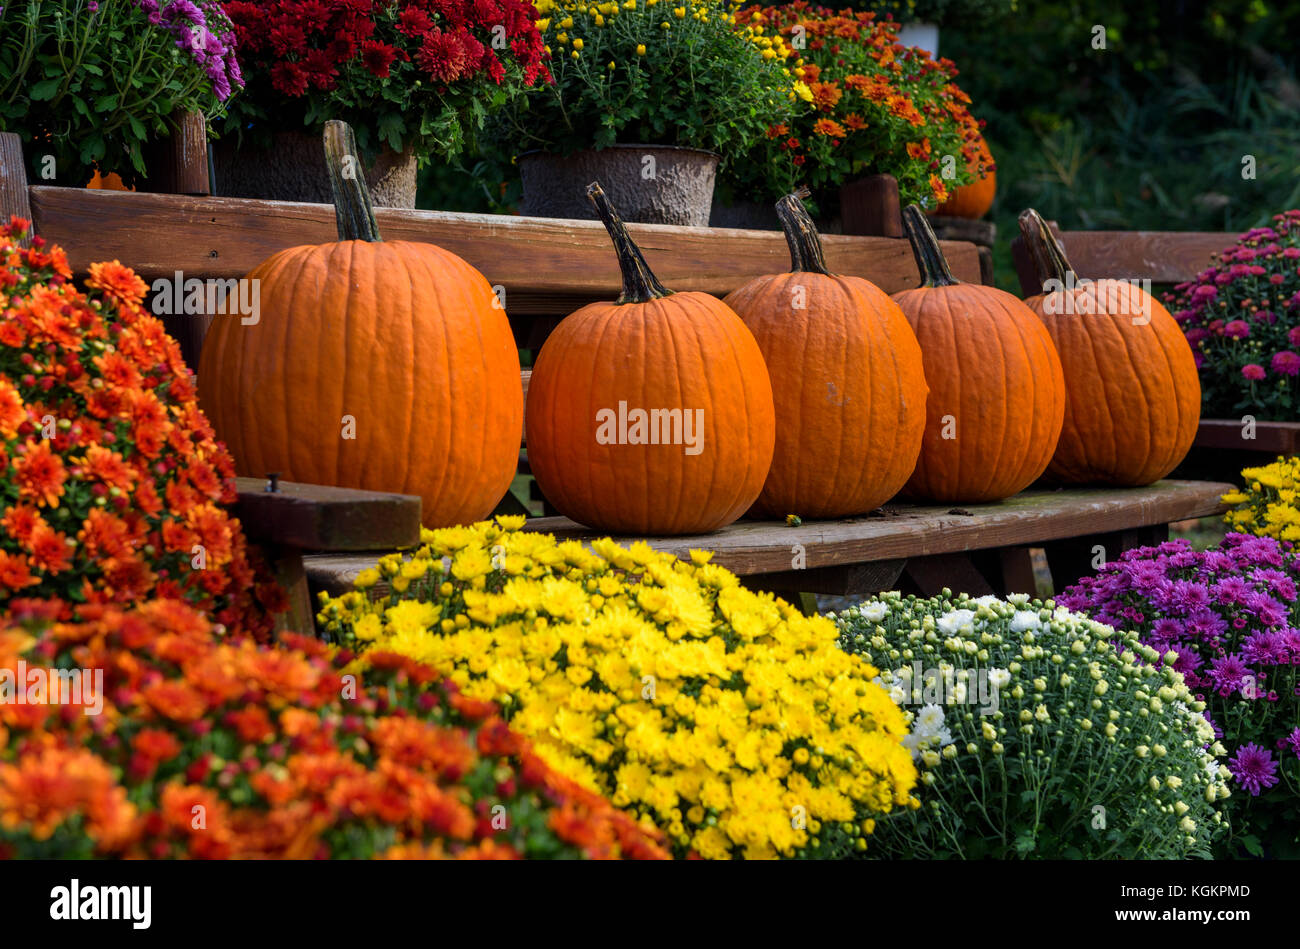 Pumpkins and chrysanthemum plants on display at a roadside produce stand. Stock Photo